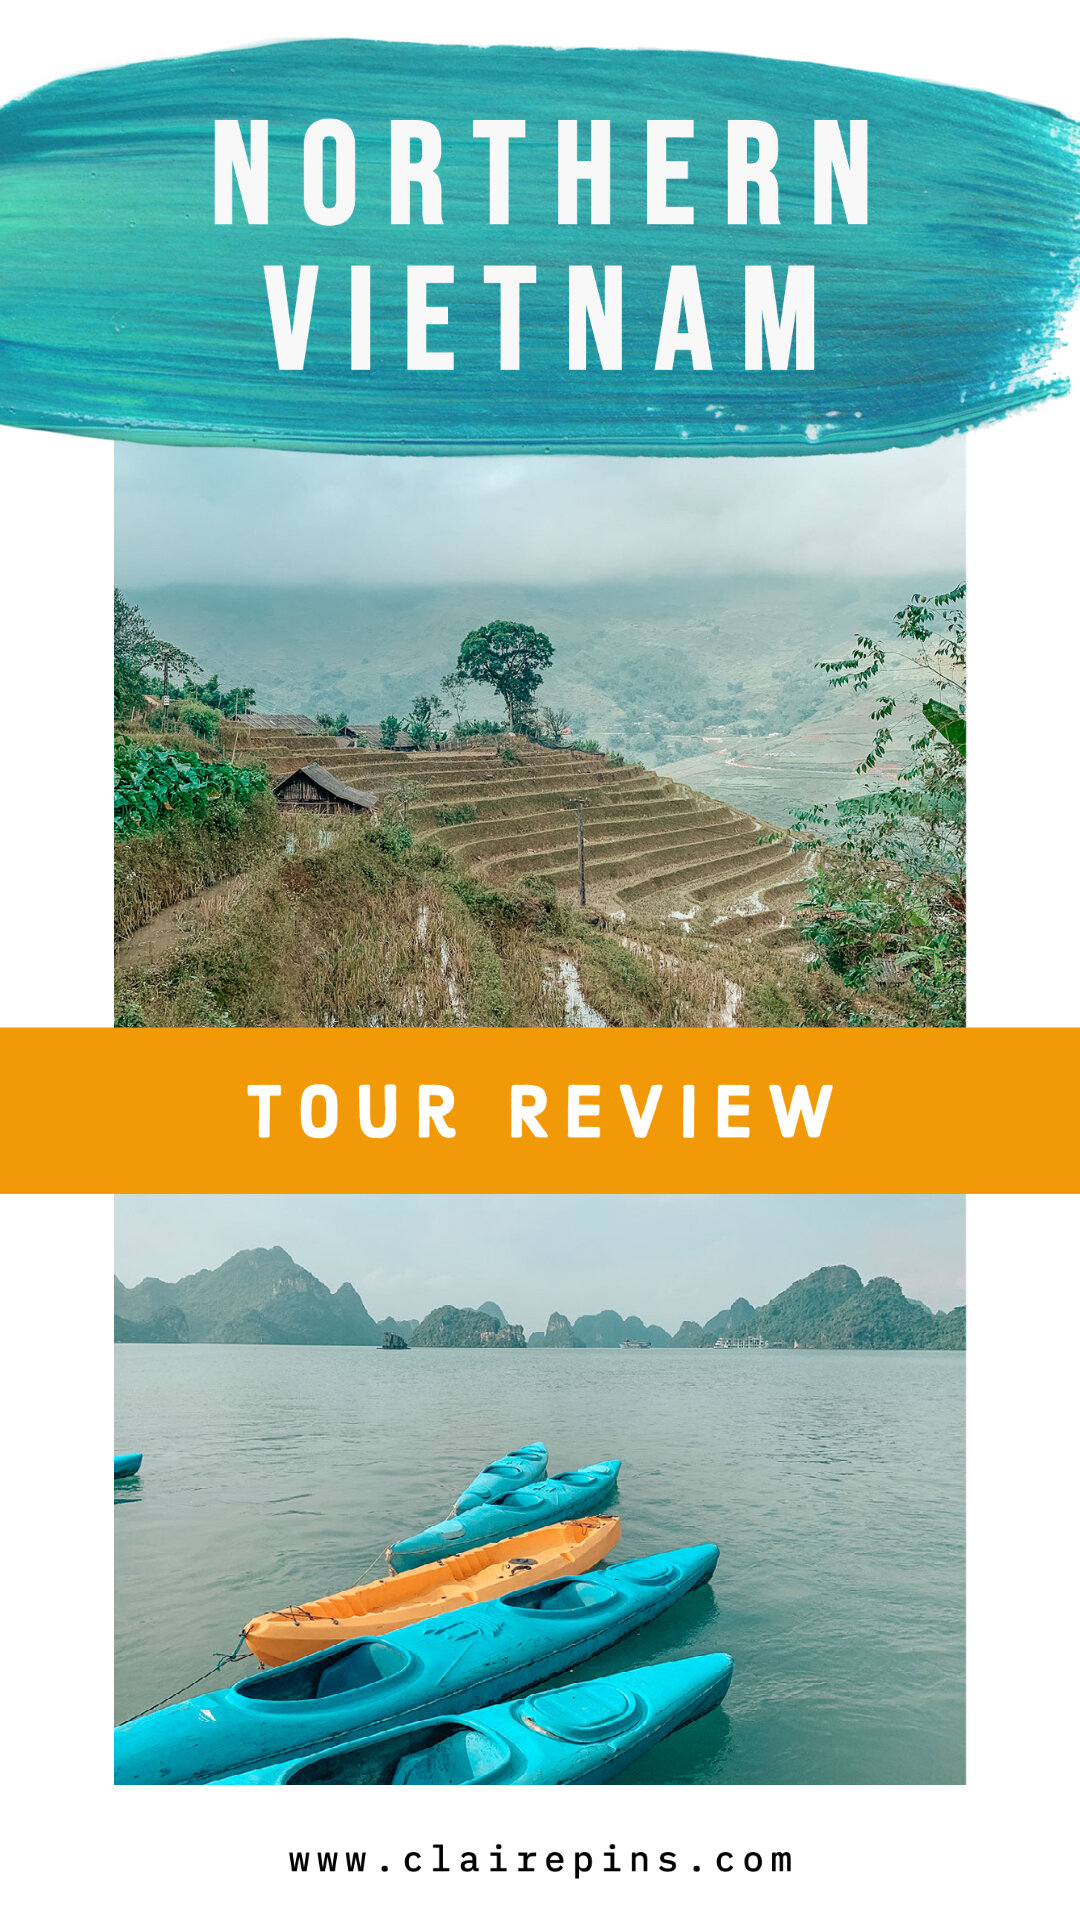 Life Before Work Vietnam Discovery Asia Tour Review copy 2.jpg